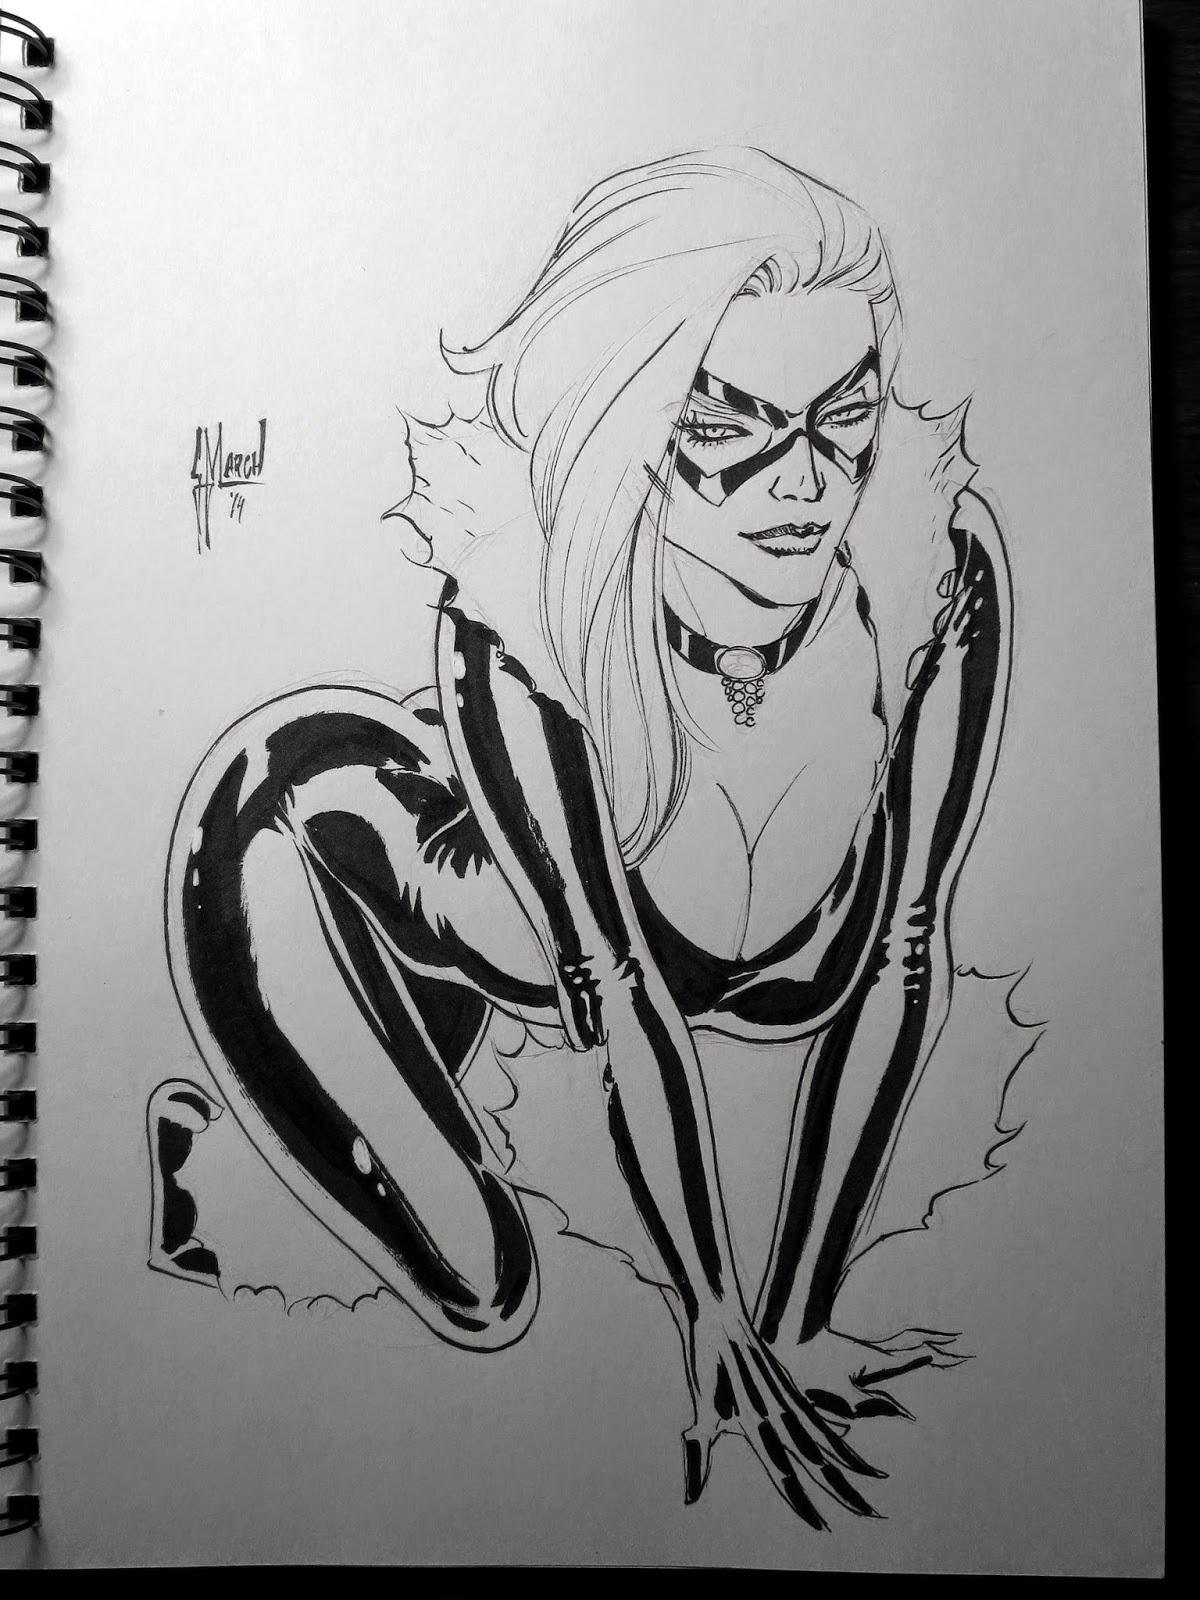 Commissions from last weekend at the PHILADELPHIA WIZARD WORLD Comic Con by Guillem March